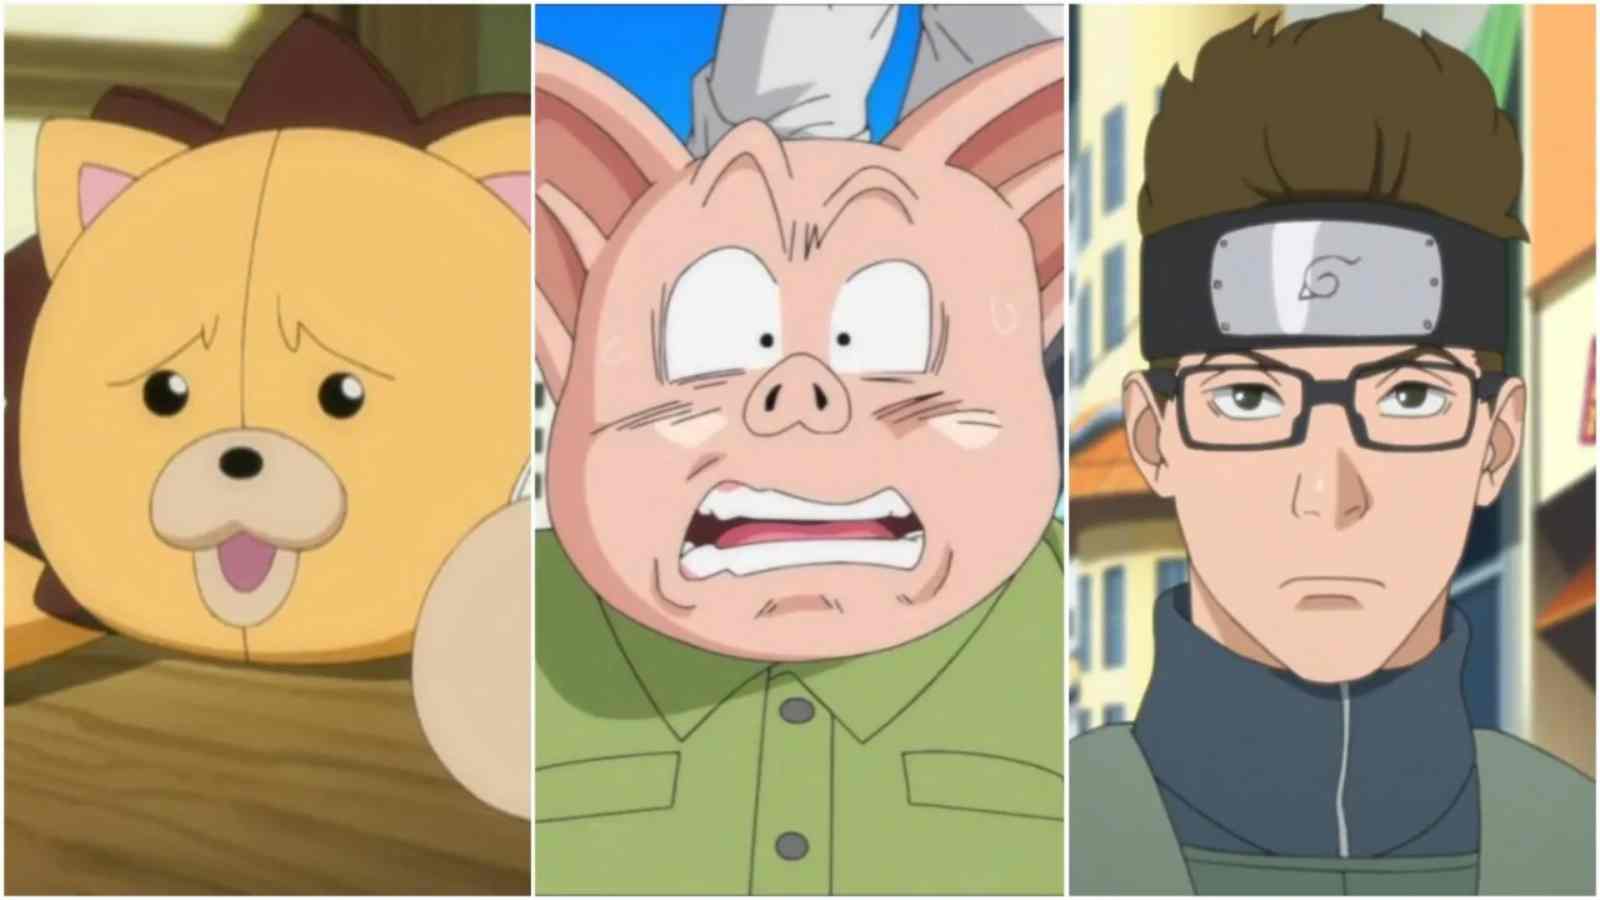 Top 10 Weakest Anime Characters Of All Time Ranked